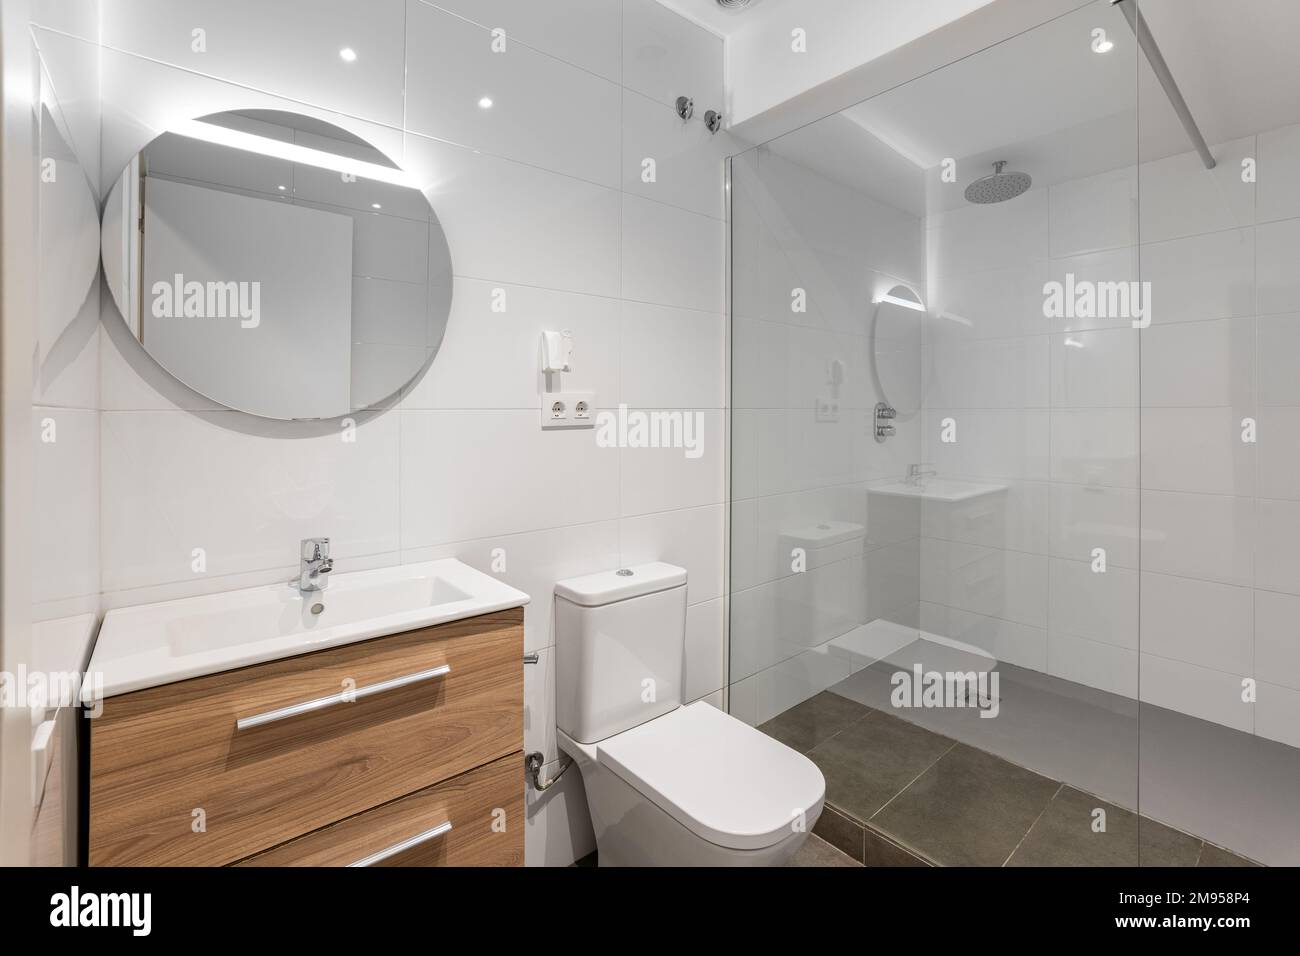 Bathroom with a toilet bowl and a sink made of white durable ceramics and wooder drawers. Shower with glass wall. Larger round mirror on the wall Stock Photo